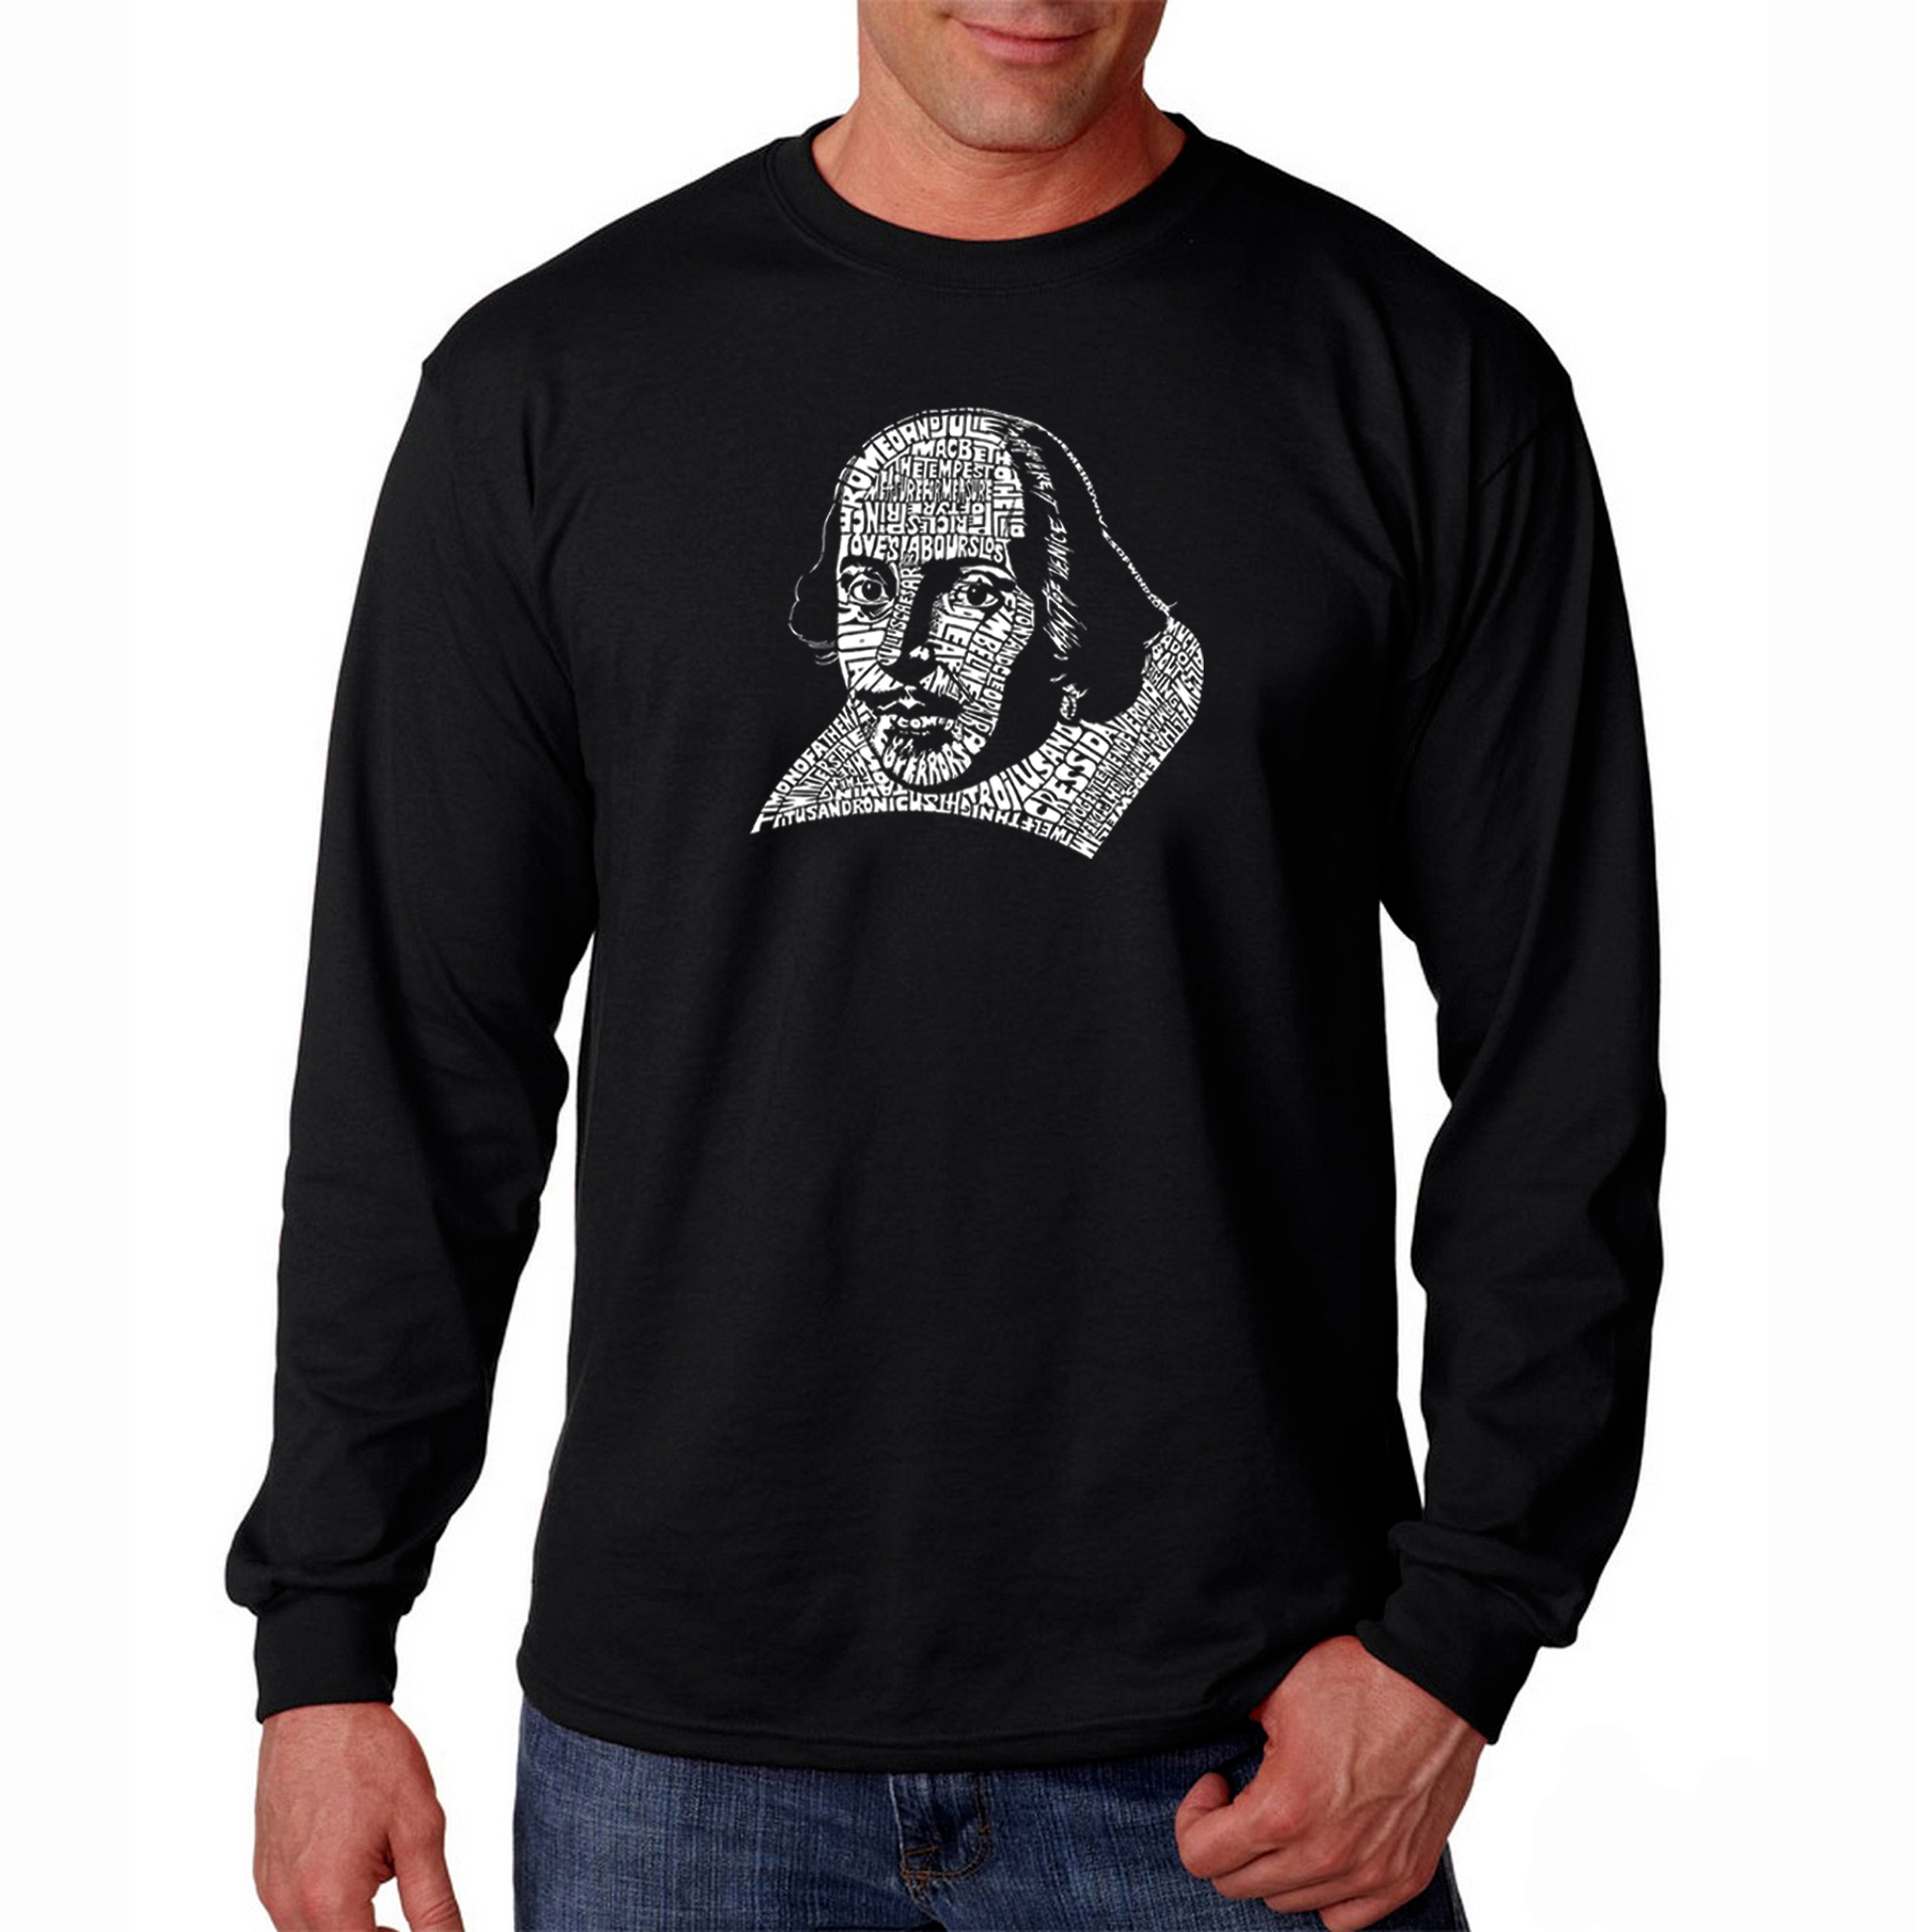 Los Angeles Pop Art Men's Word Art Long Sleeve T-Shirt - The titles of all of William Shakespeare's Comedies & Tragedies